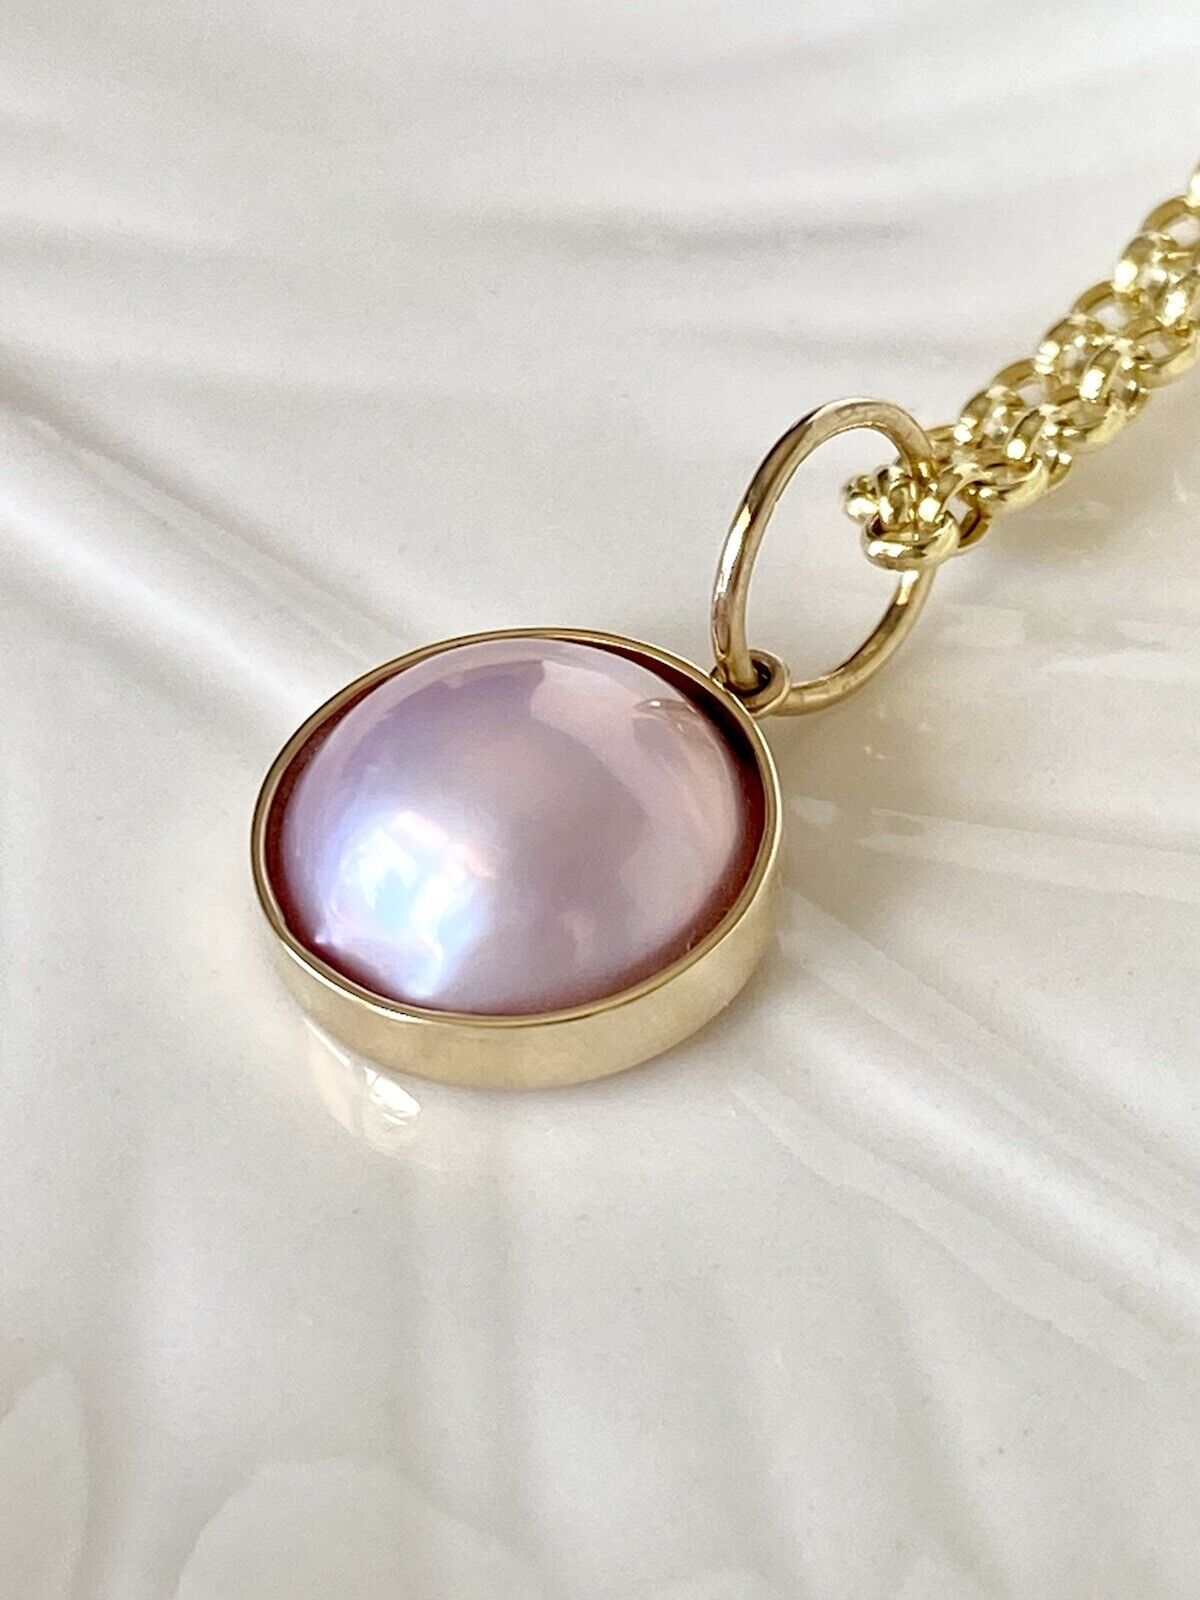 Genuine Pink Mabe Pearl (11mm) Solid 14K Yellow Gold Pendant, New